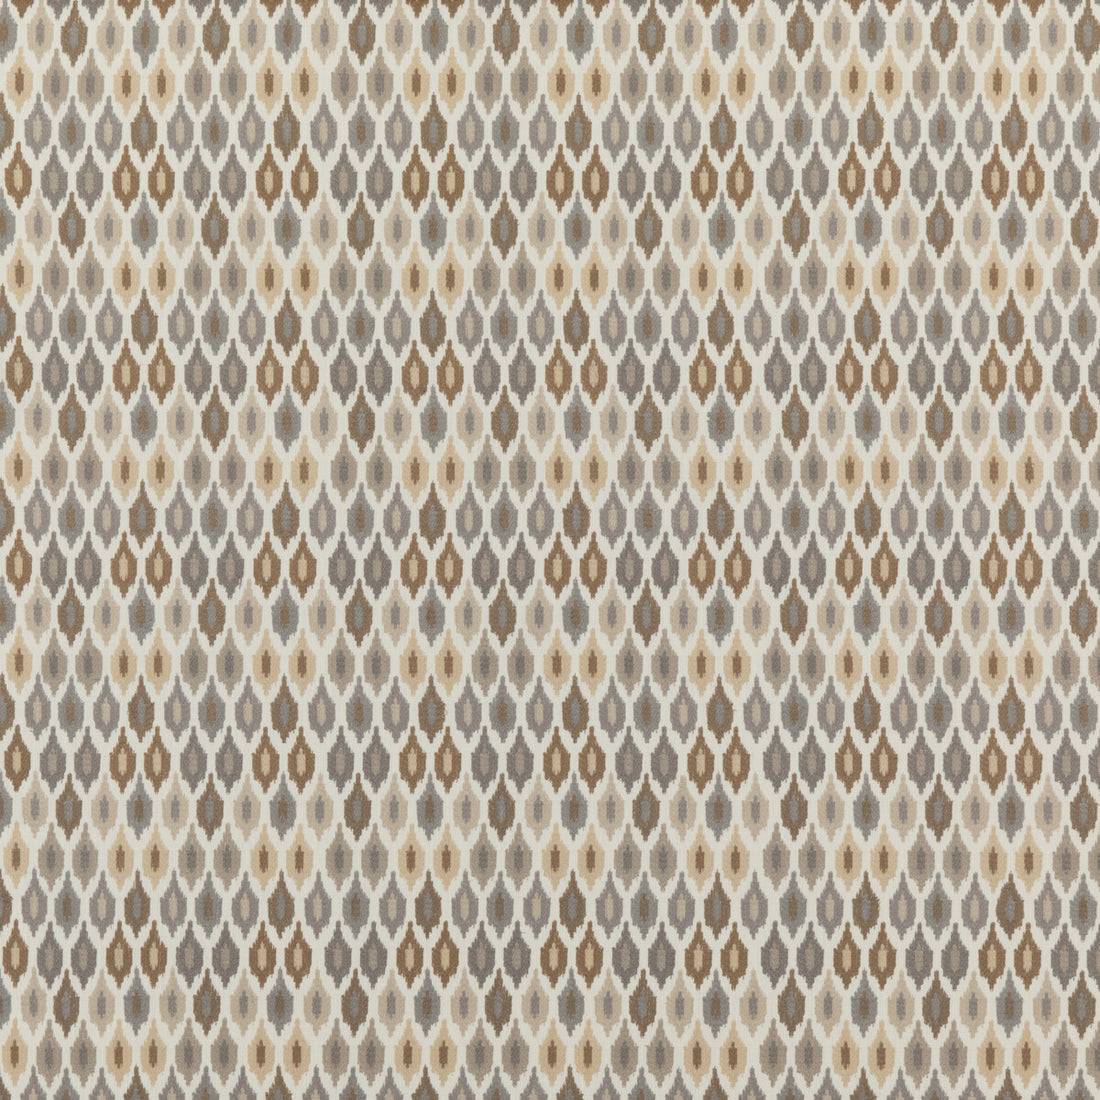 Mazara fabric in stone color - pattern PF50446.2.0 - by Baker Lifestyle in the Homes &amp; Gardens III collection